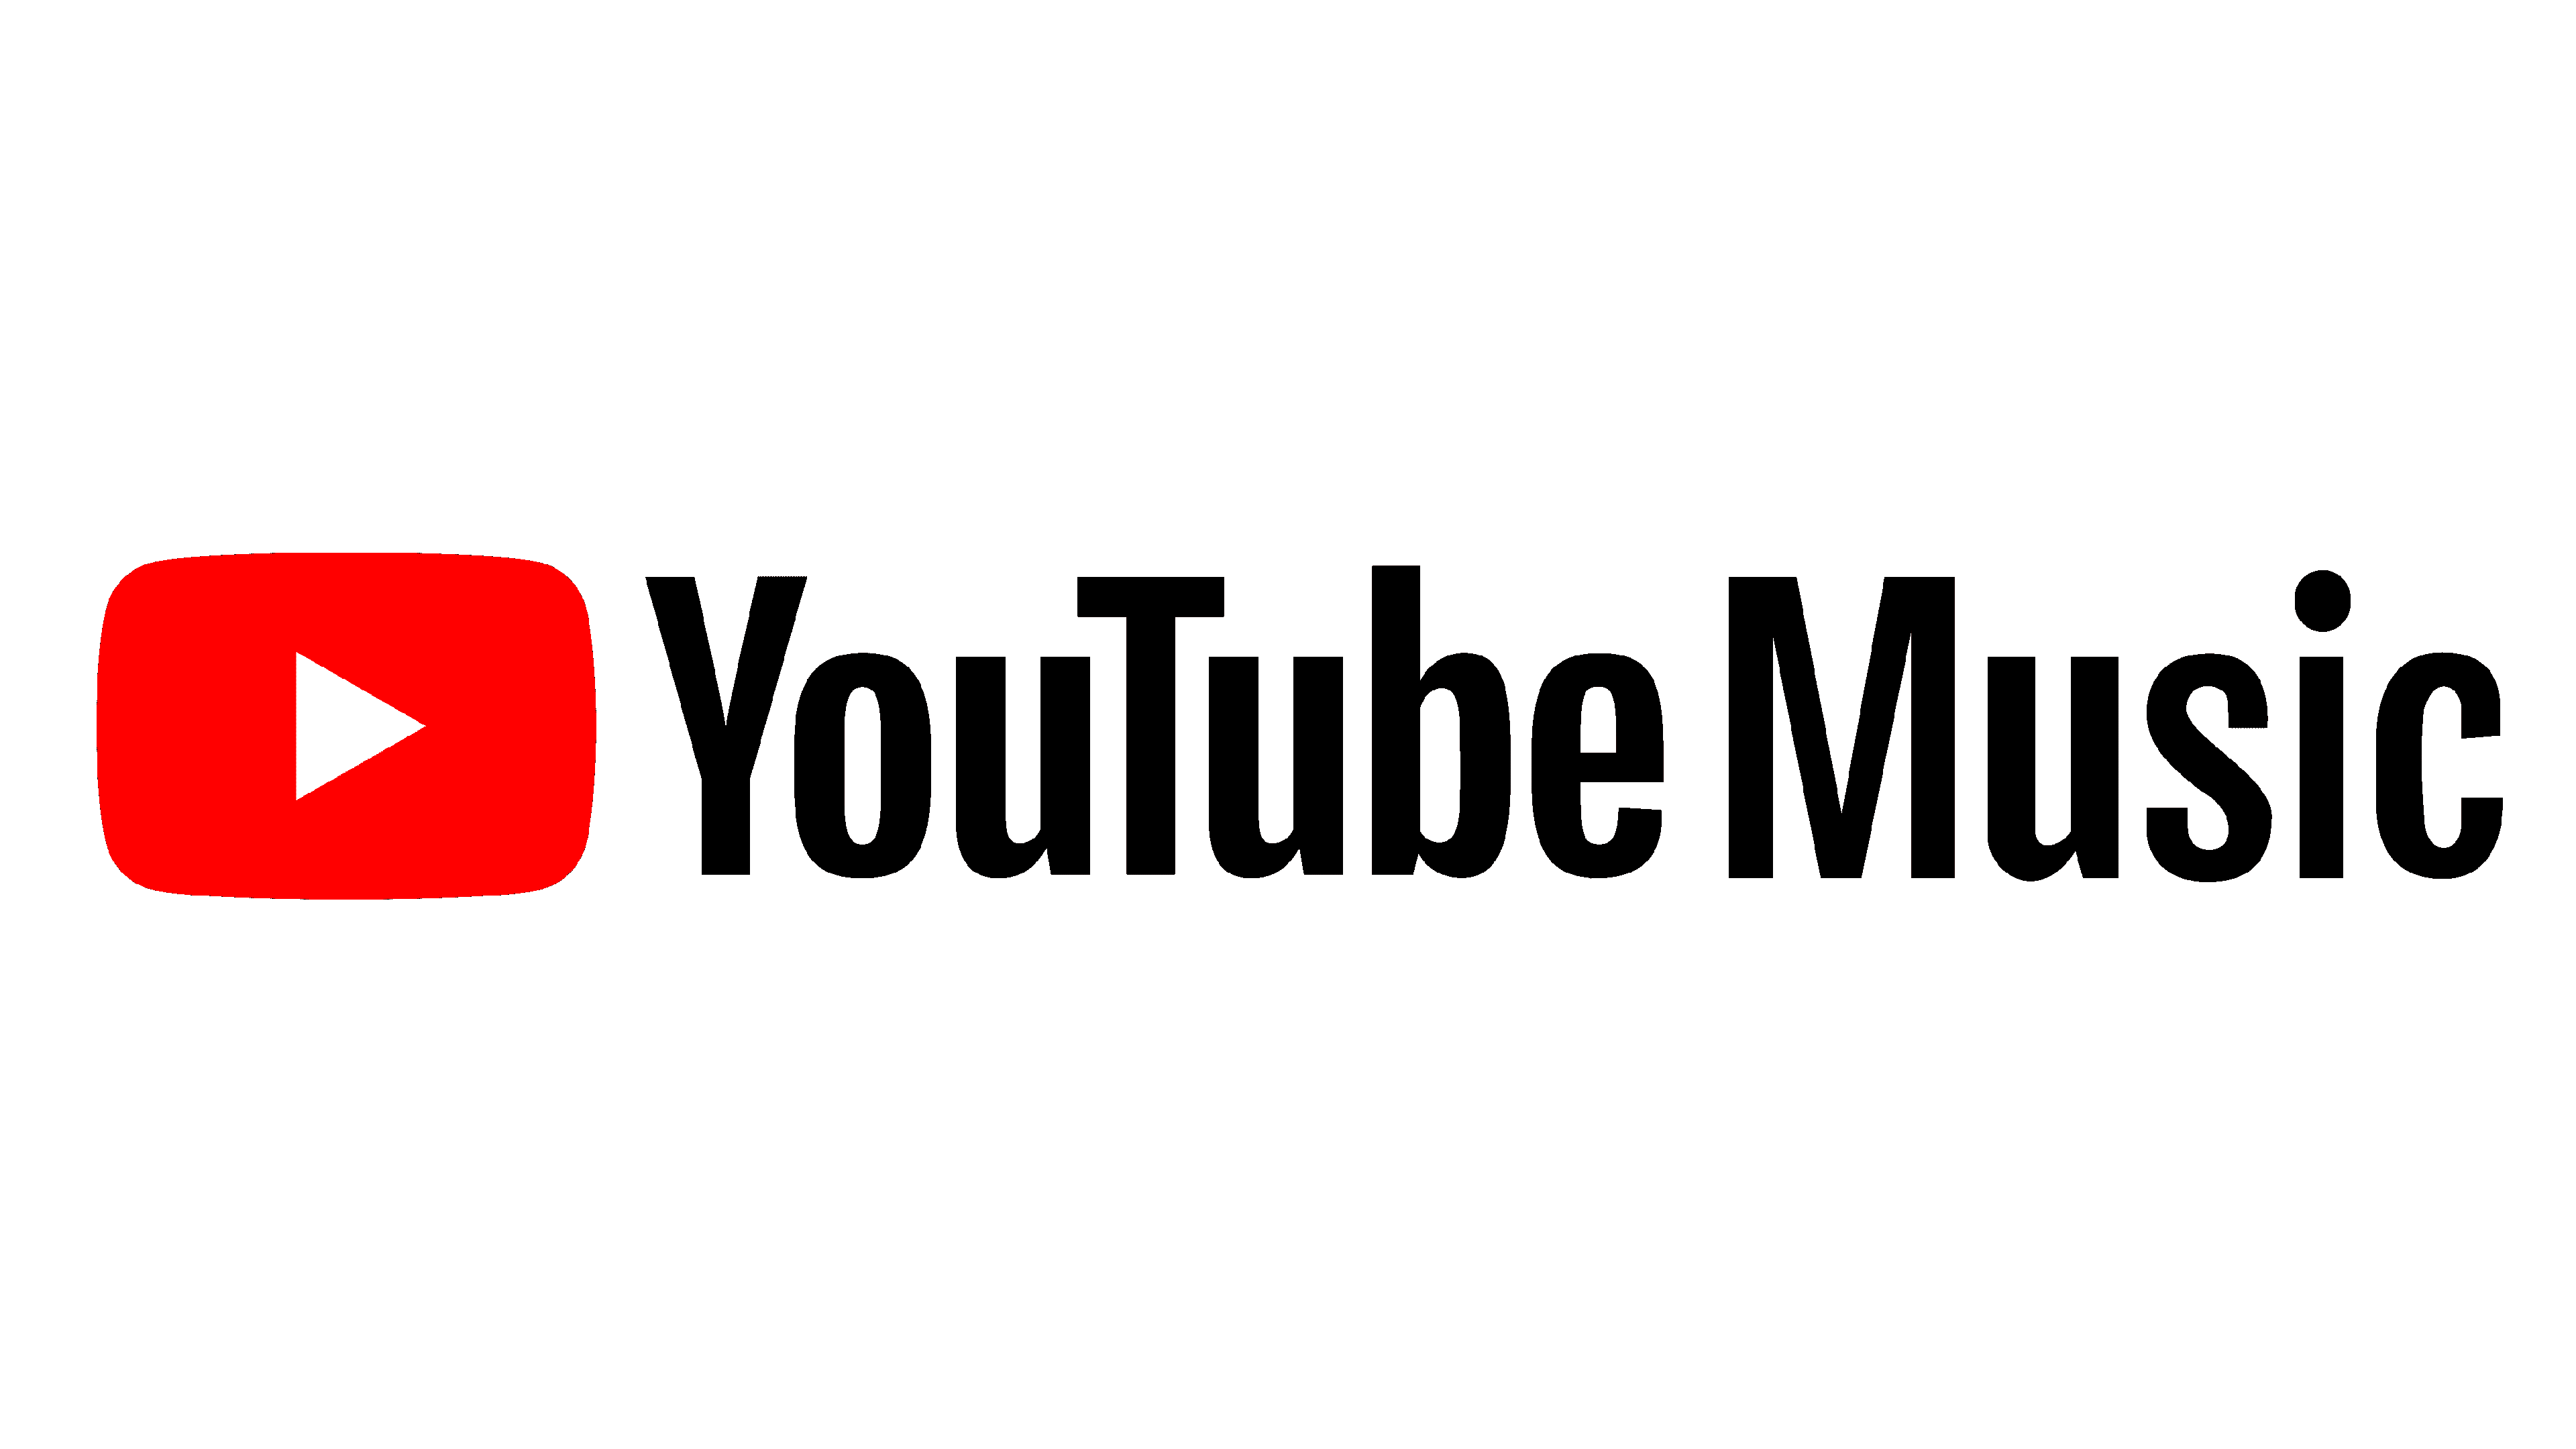 YouTube Podcasts in the UK and the YouTube Advertising Conundrum